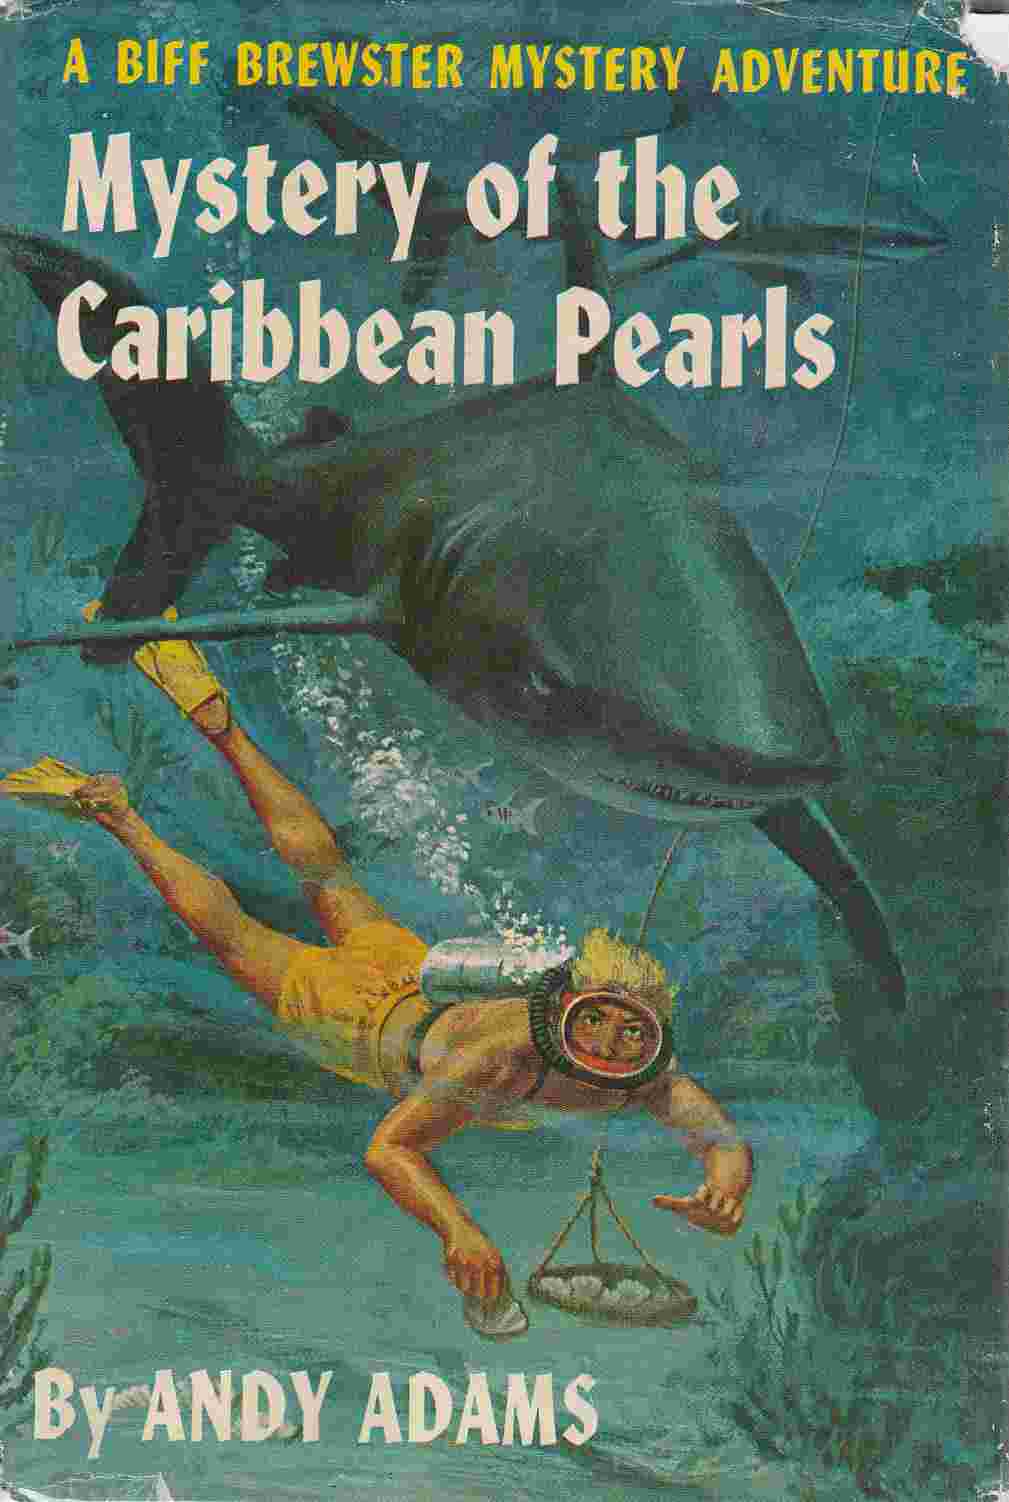 Mystery of the Caribbean Pearls